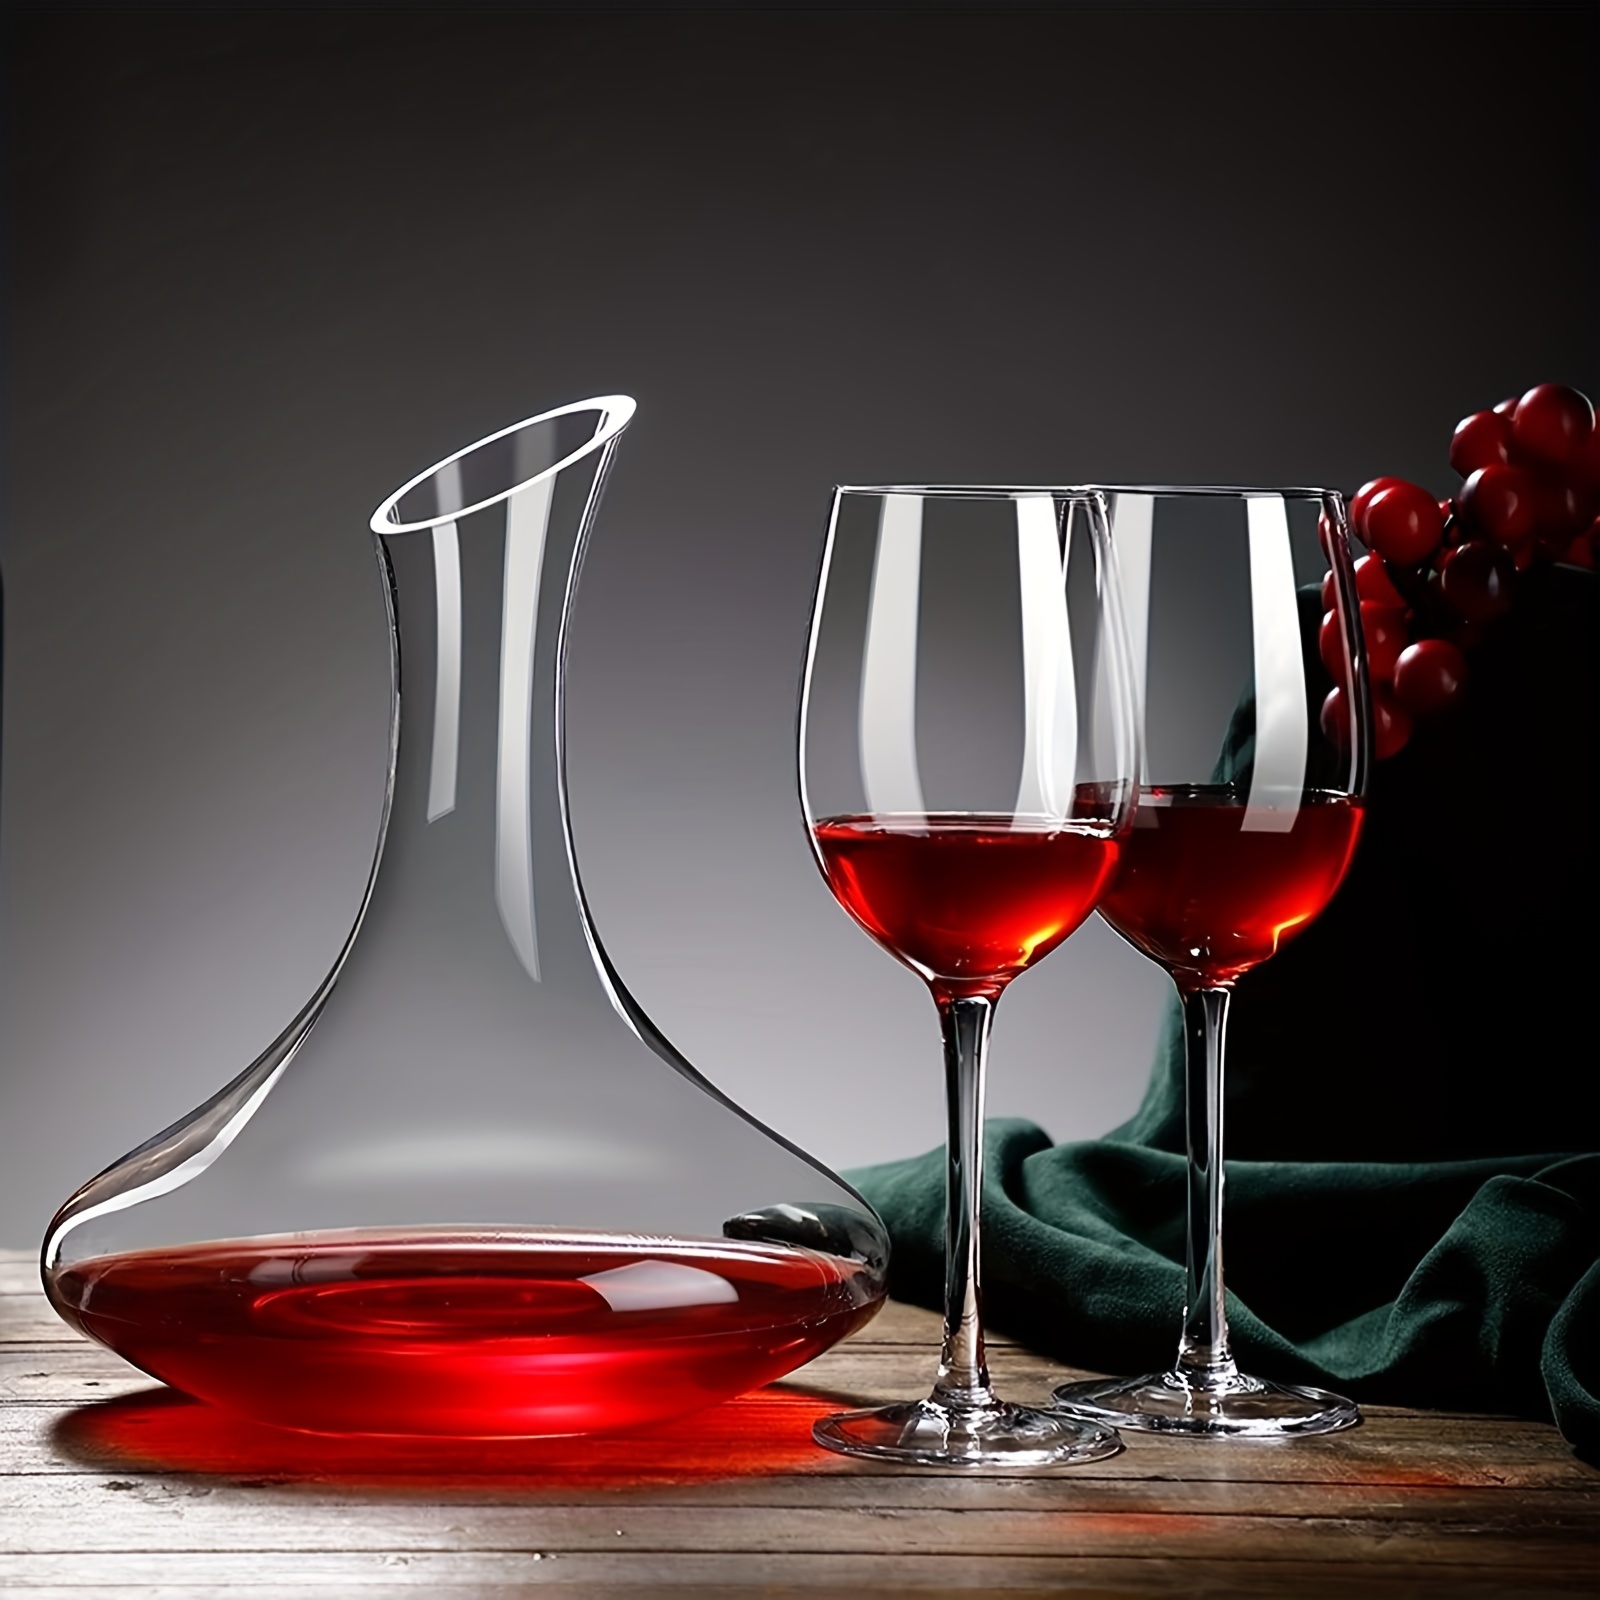 European Glass Red Wine - White Wine - Water Glass - Assorted Colors-  Stemmed Glasses - Set of 6 Goblets - 10 oz. Beautifully Designed